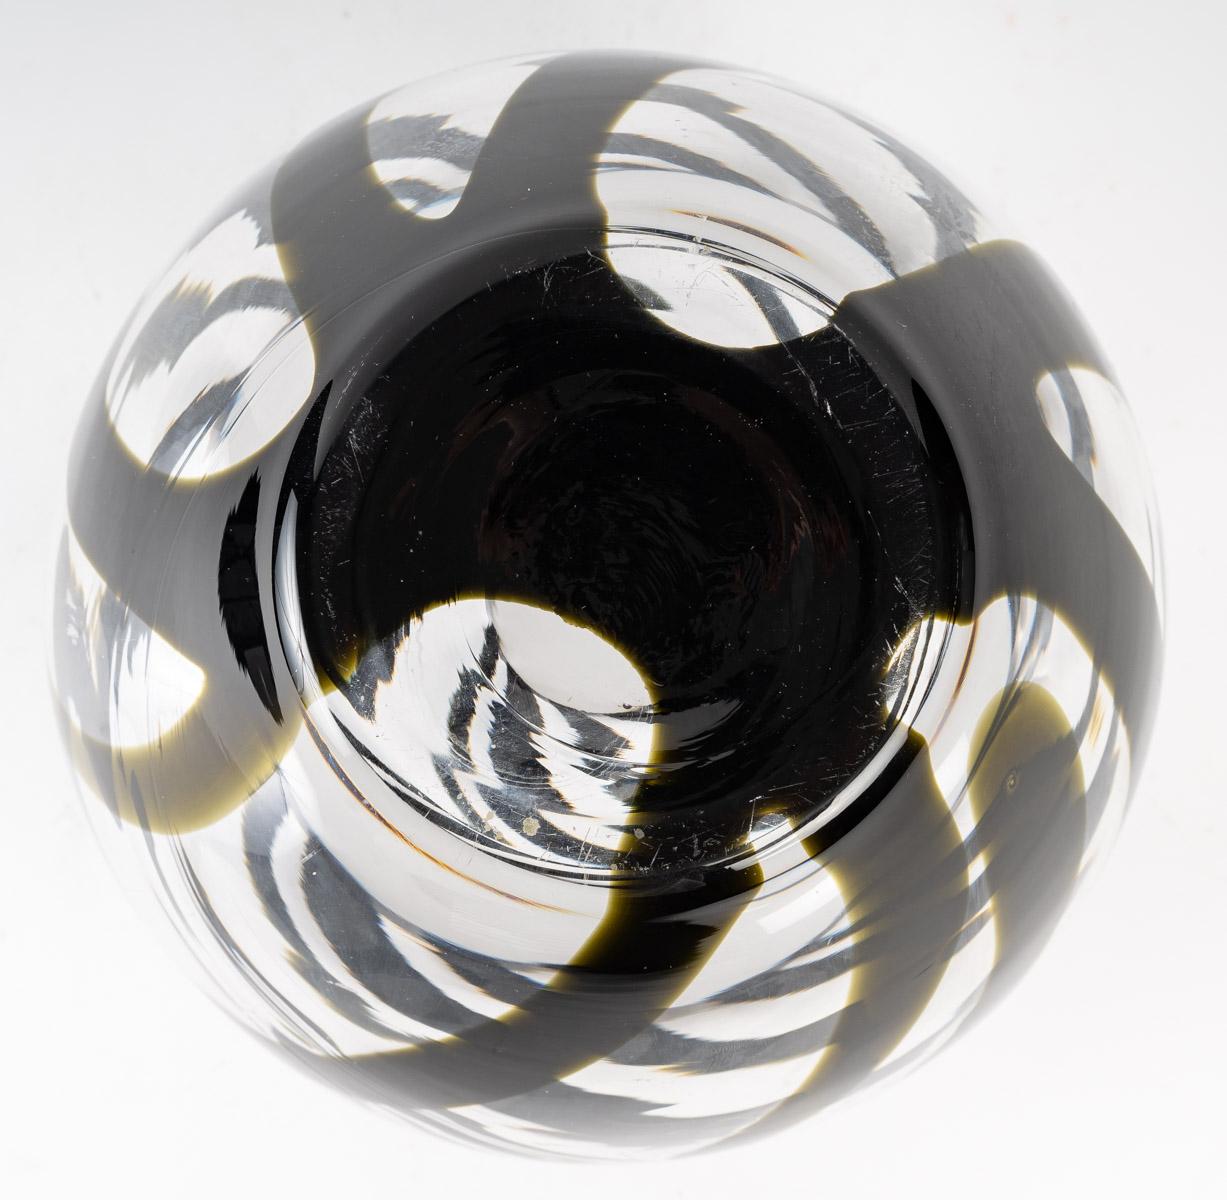 Oval glass vase decorated with black stripes, 20th century.
Measures: H: 26 cm, W: 18 cm, D: 19, D of the neck: 7 cm.